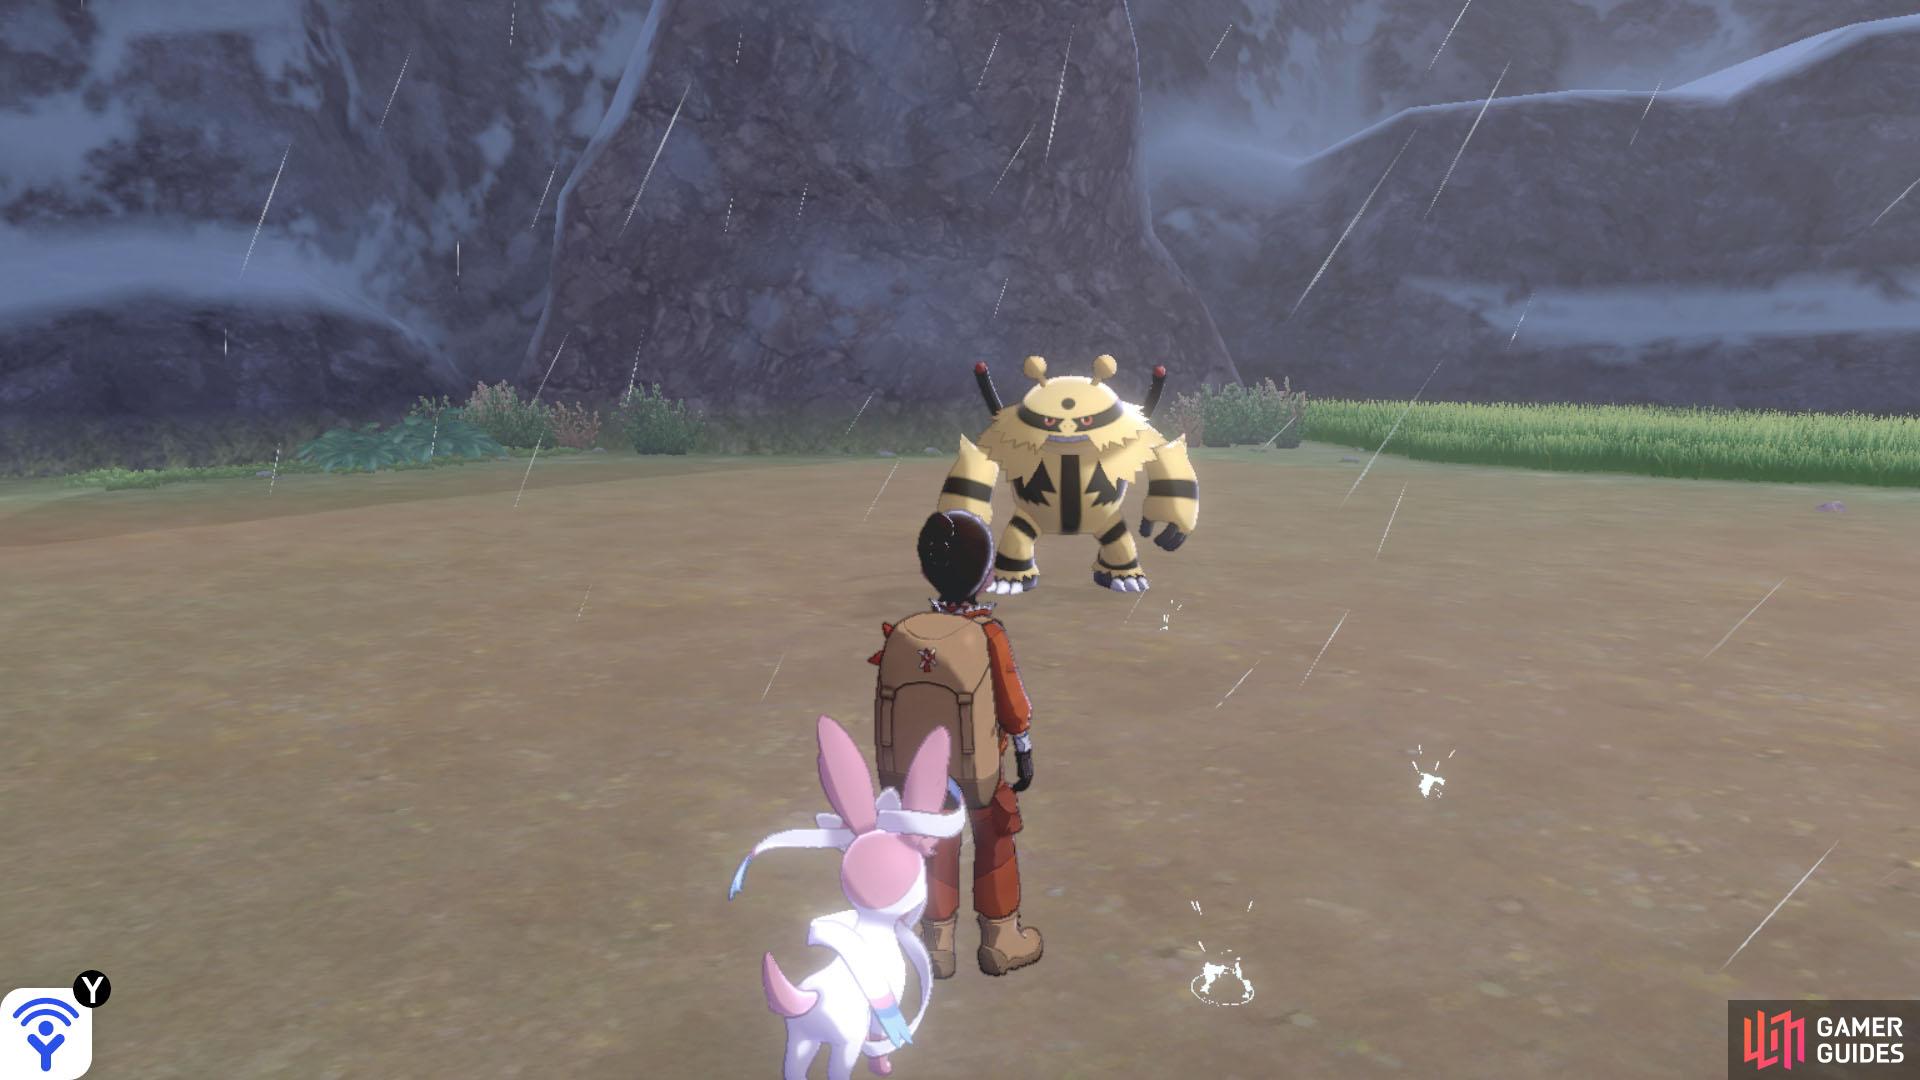 If you don’t want to trade an Electabuzz to evolve it, you could look for an Electivire during a thunderstorm.